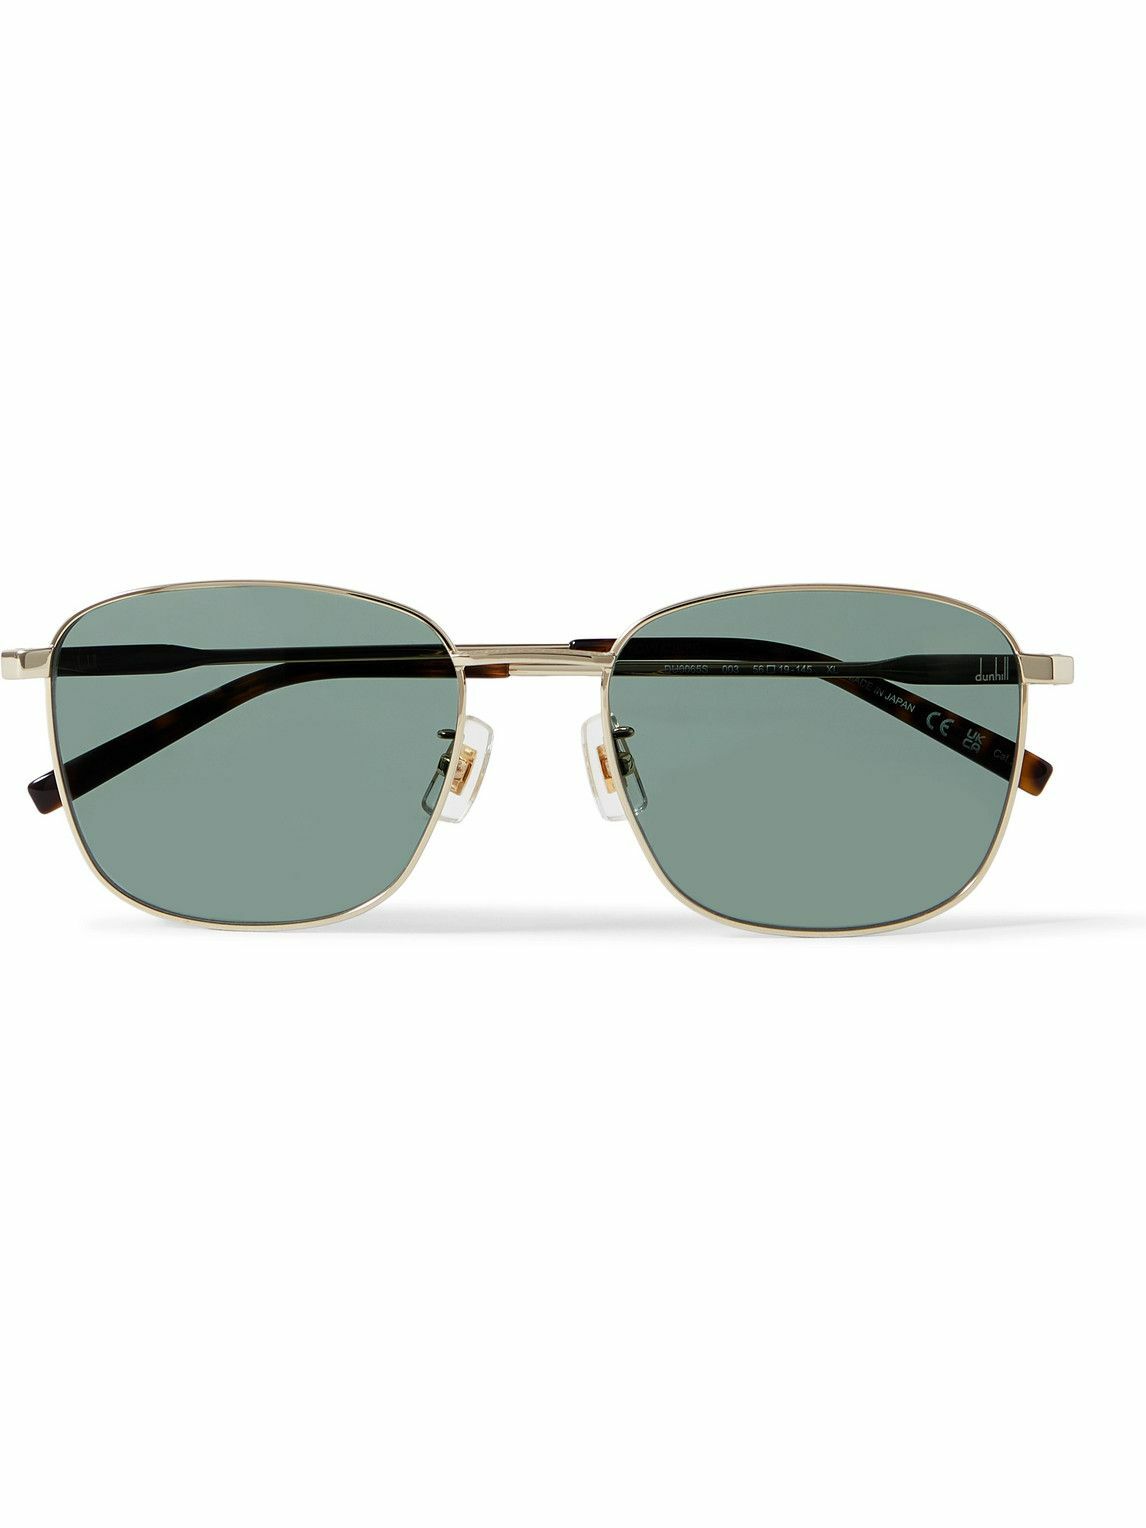 Dunhill - Square-Frame Gold-Tone Sunglasses Dunhill